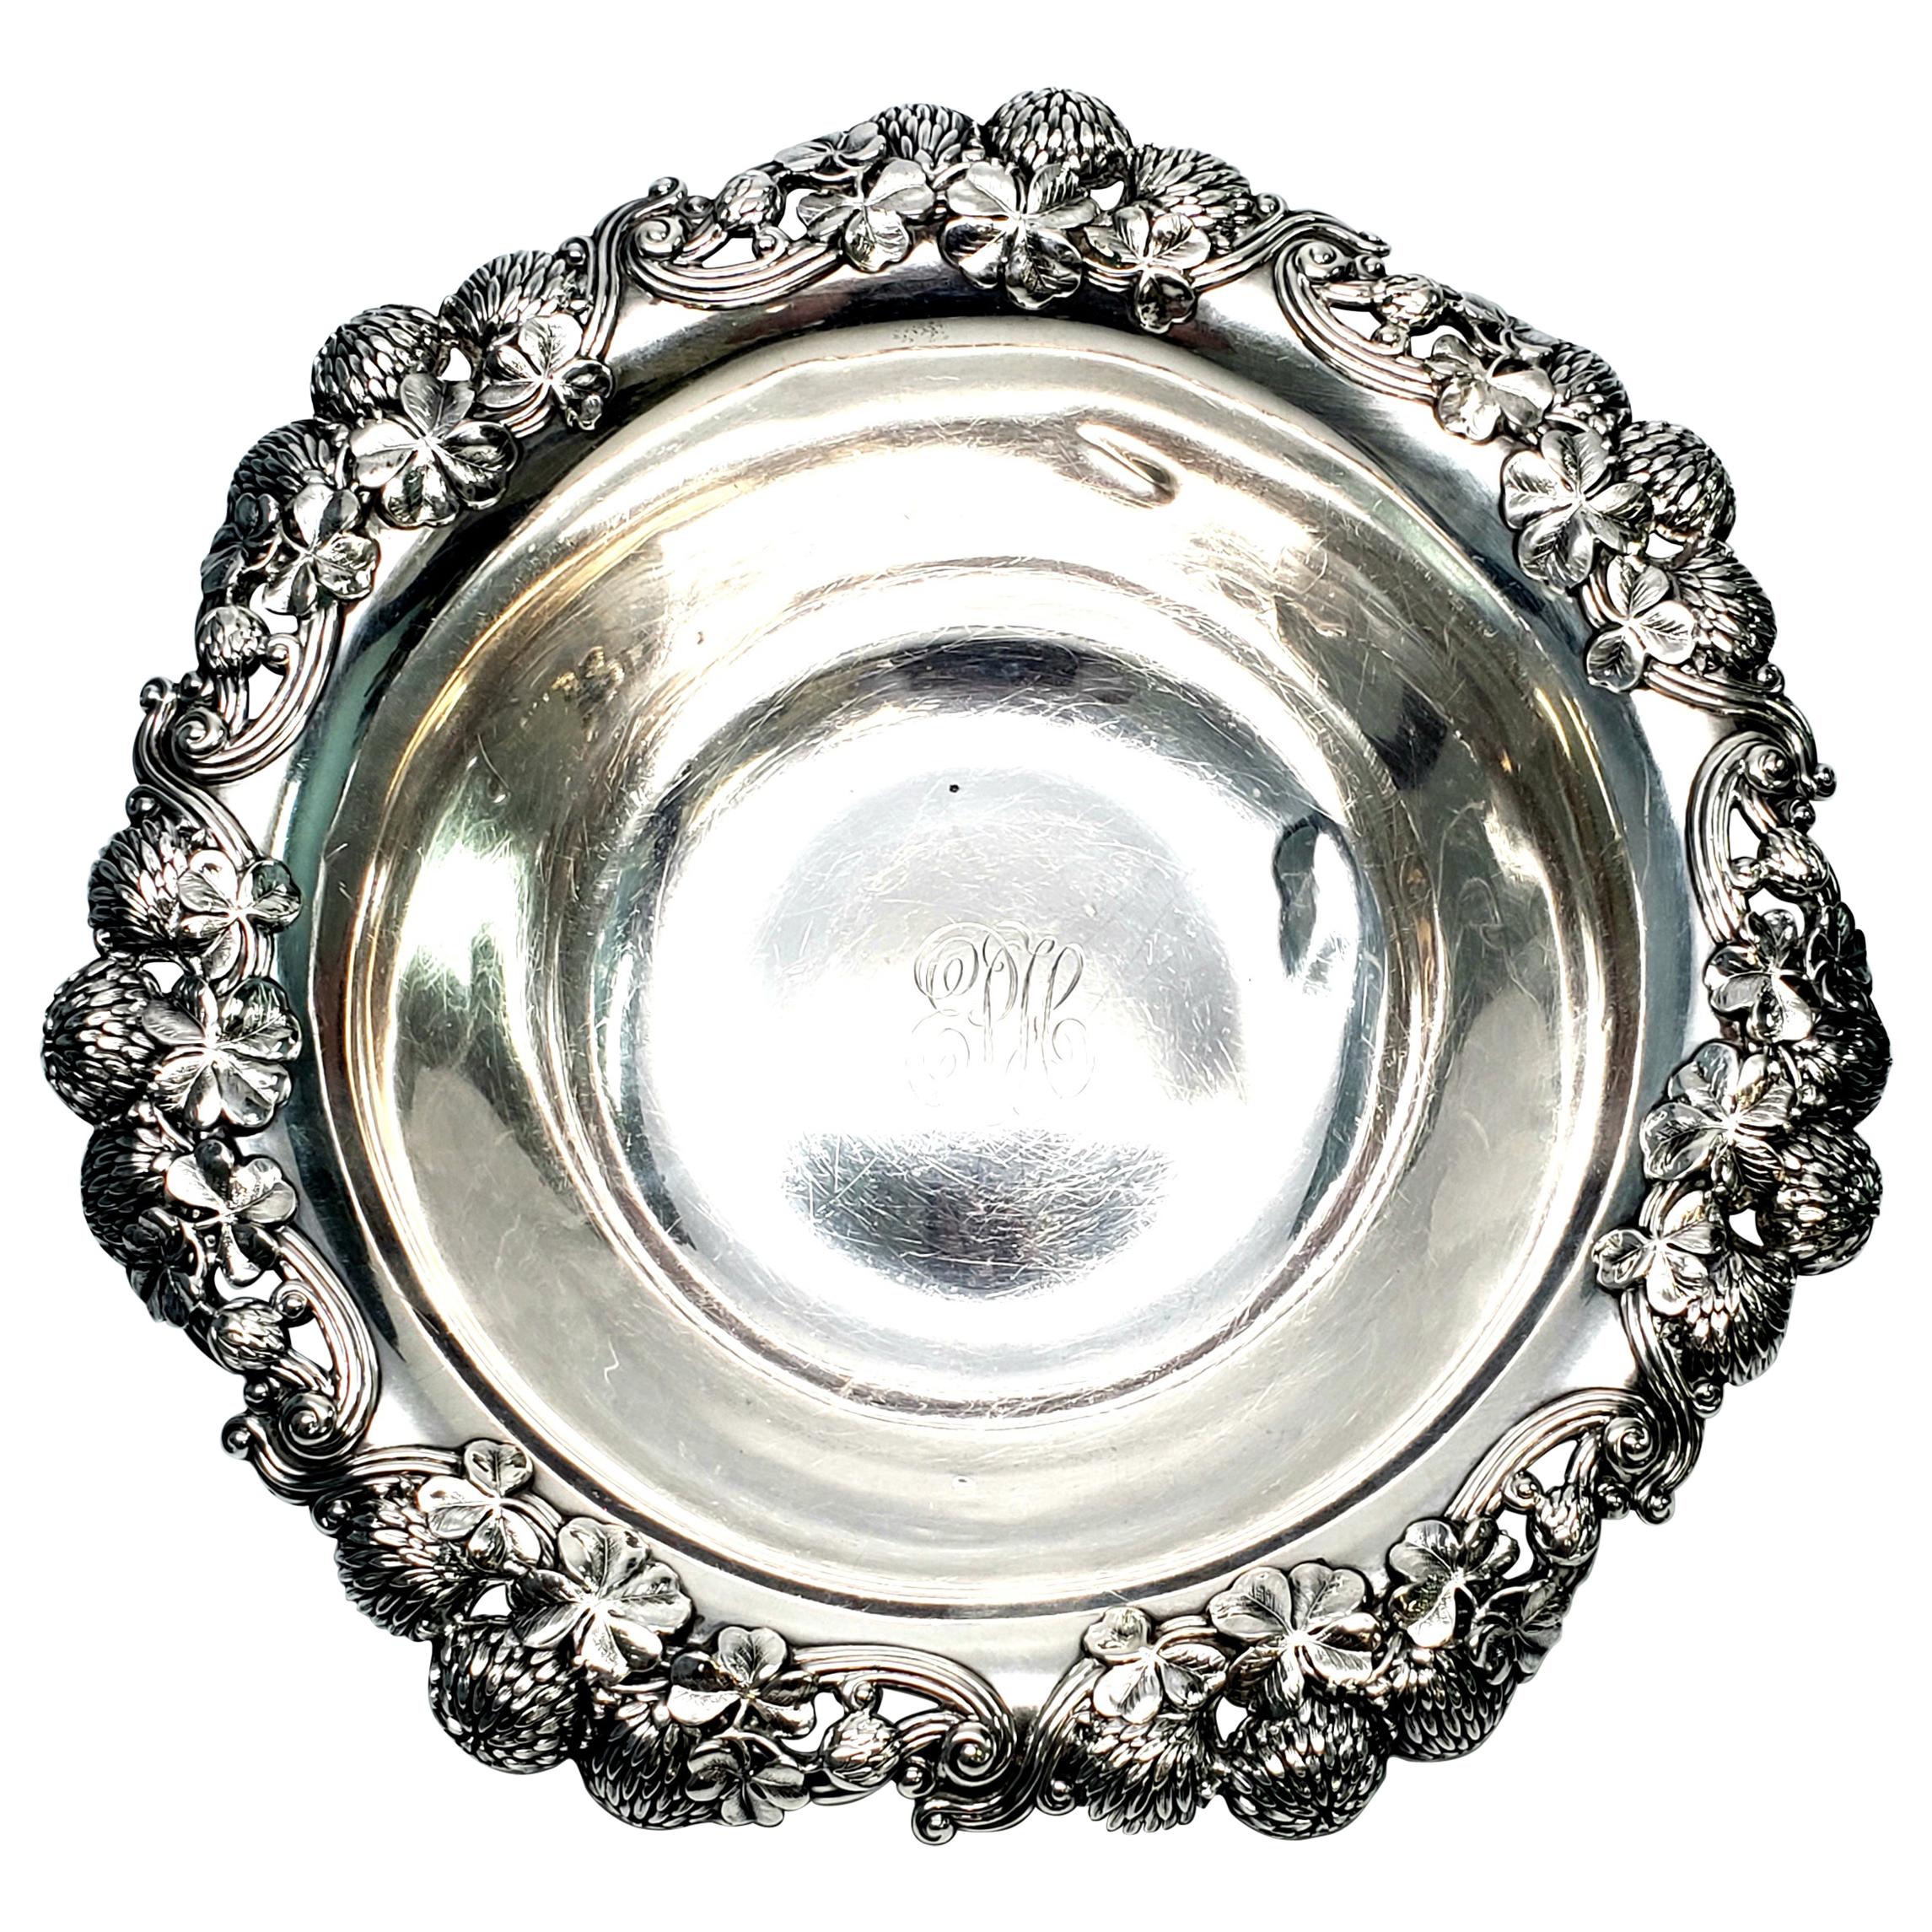 Tiffany & Co. Sterling Silver Bowl Clover Pattern with Monogram